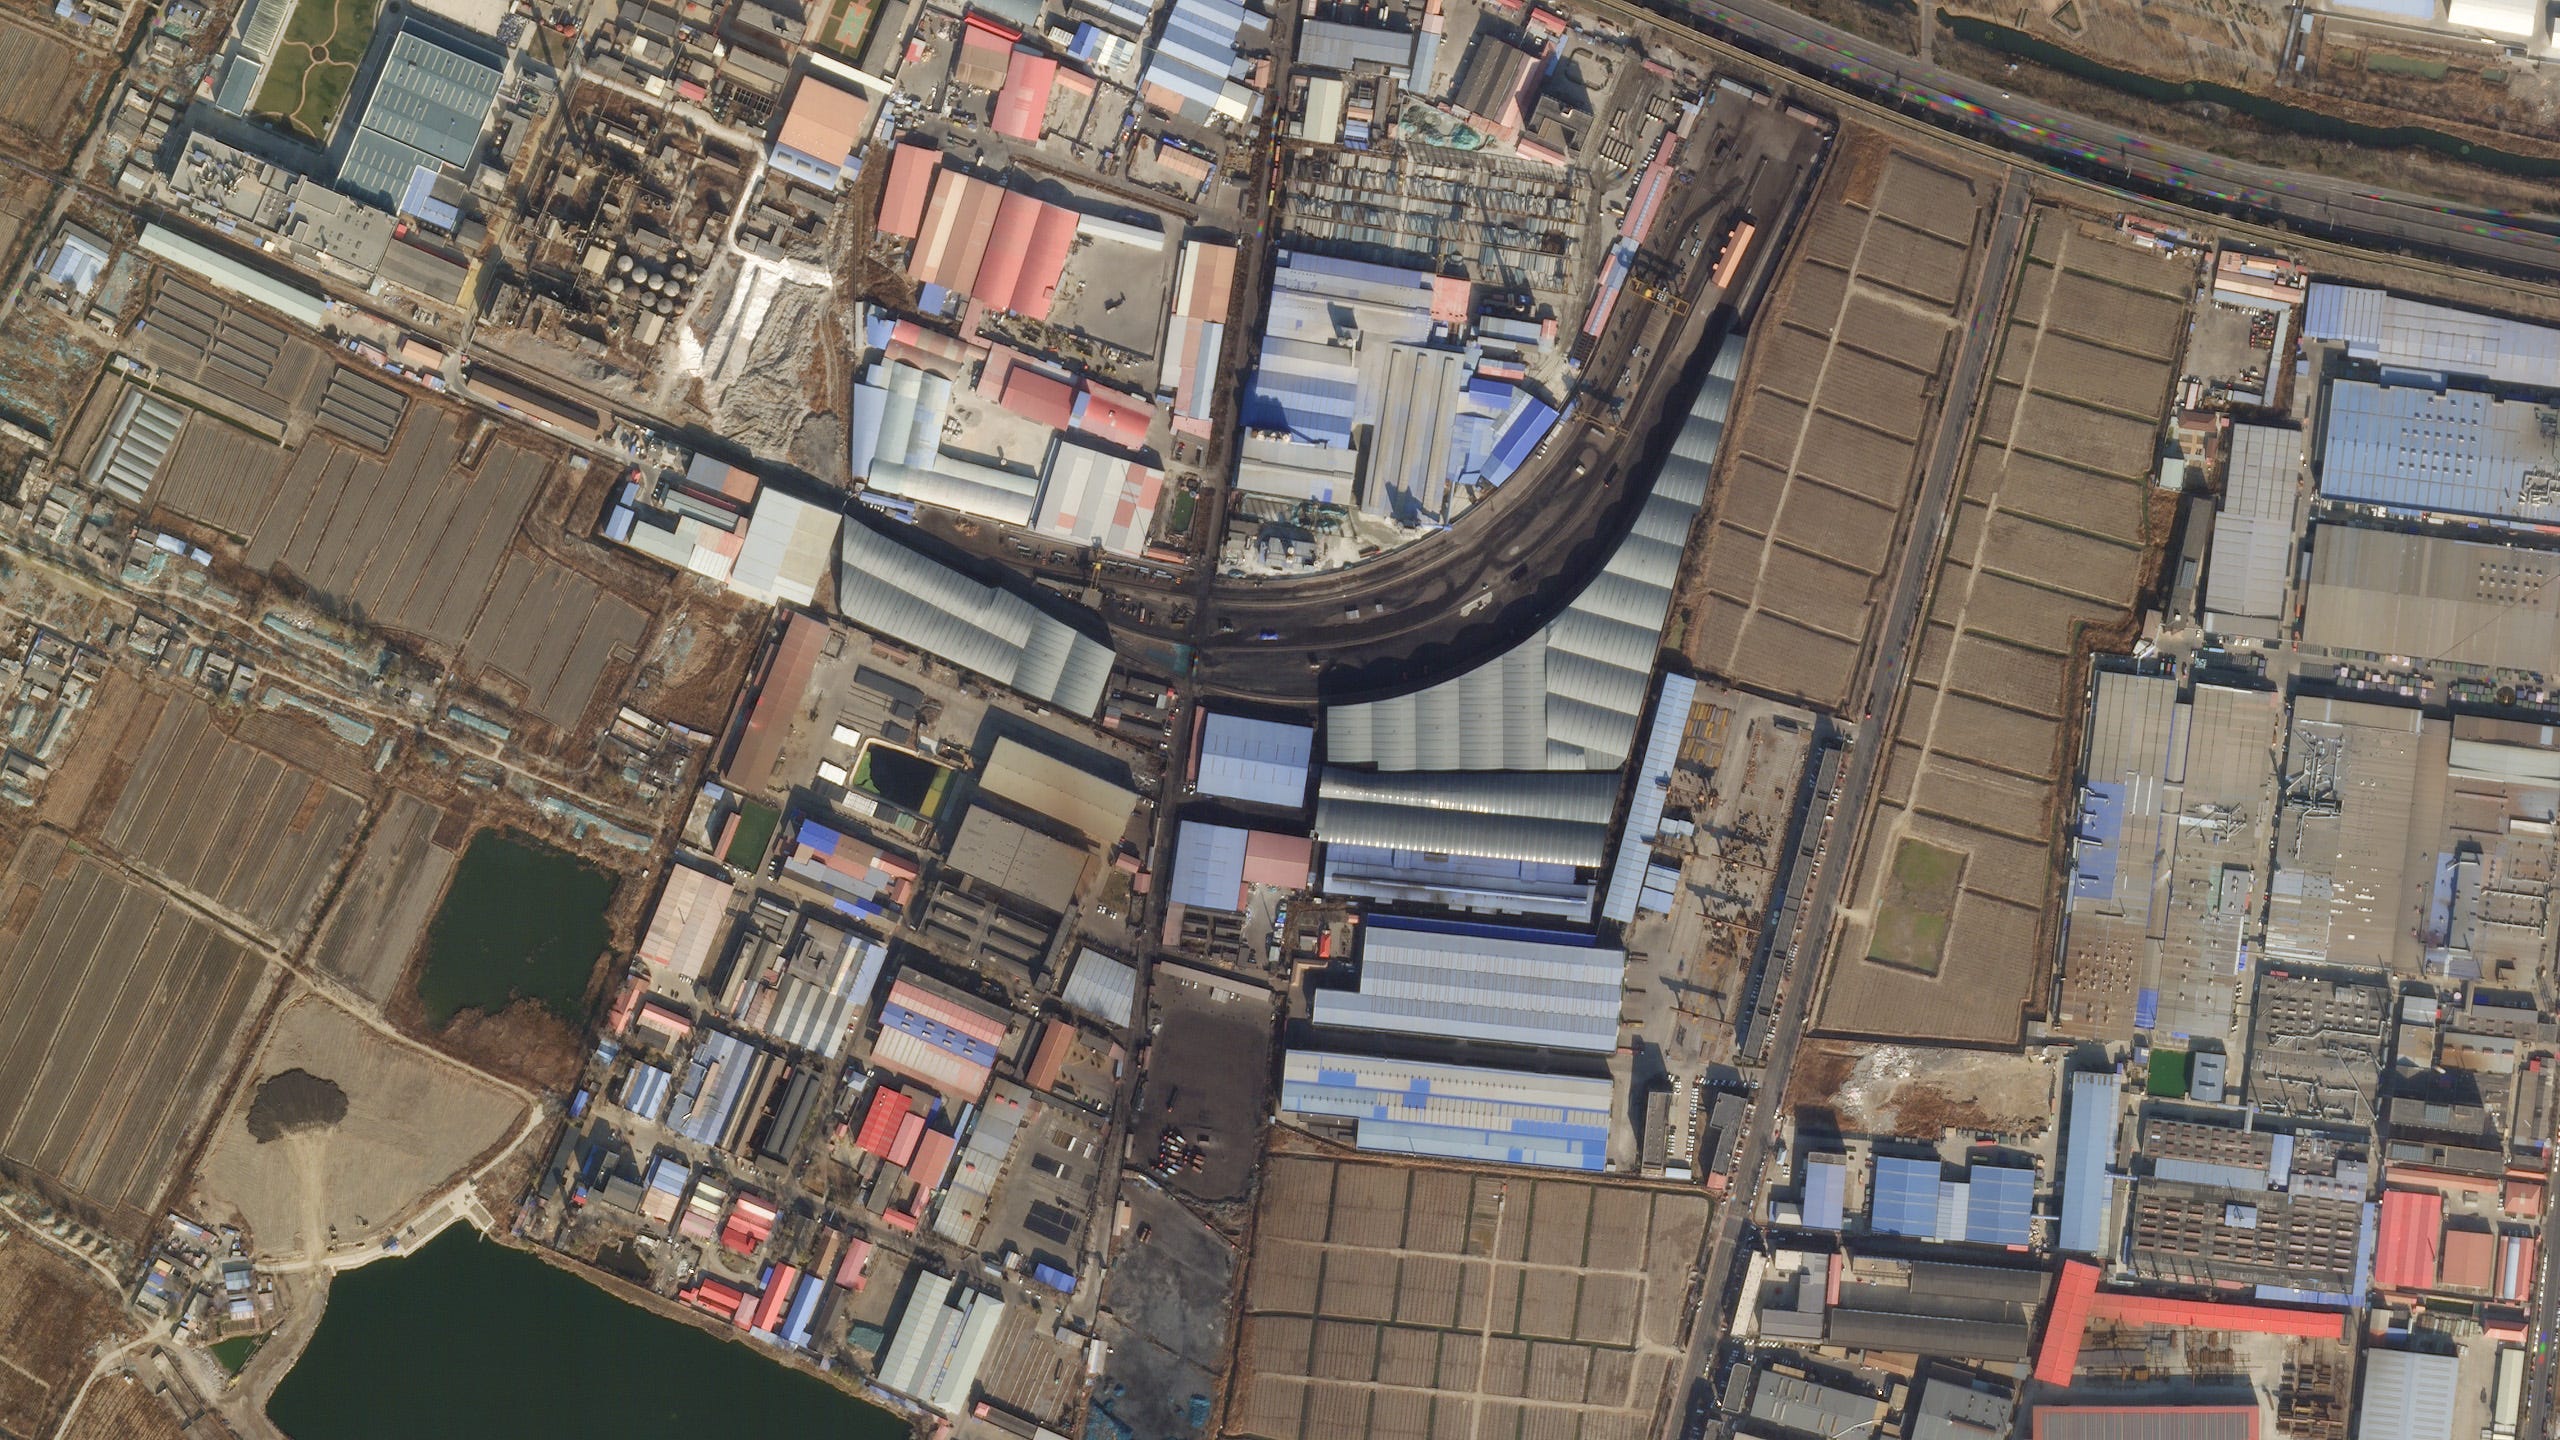 Satellite Imagery Provides Insights Into Holiday Supply Chain Images, Photos, Reviews